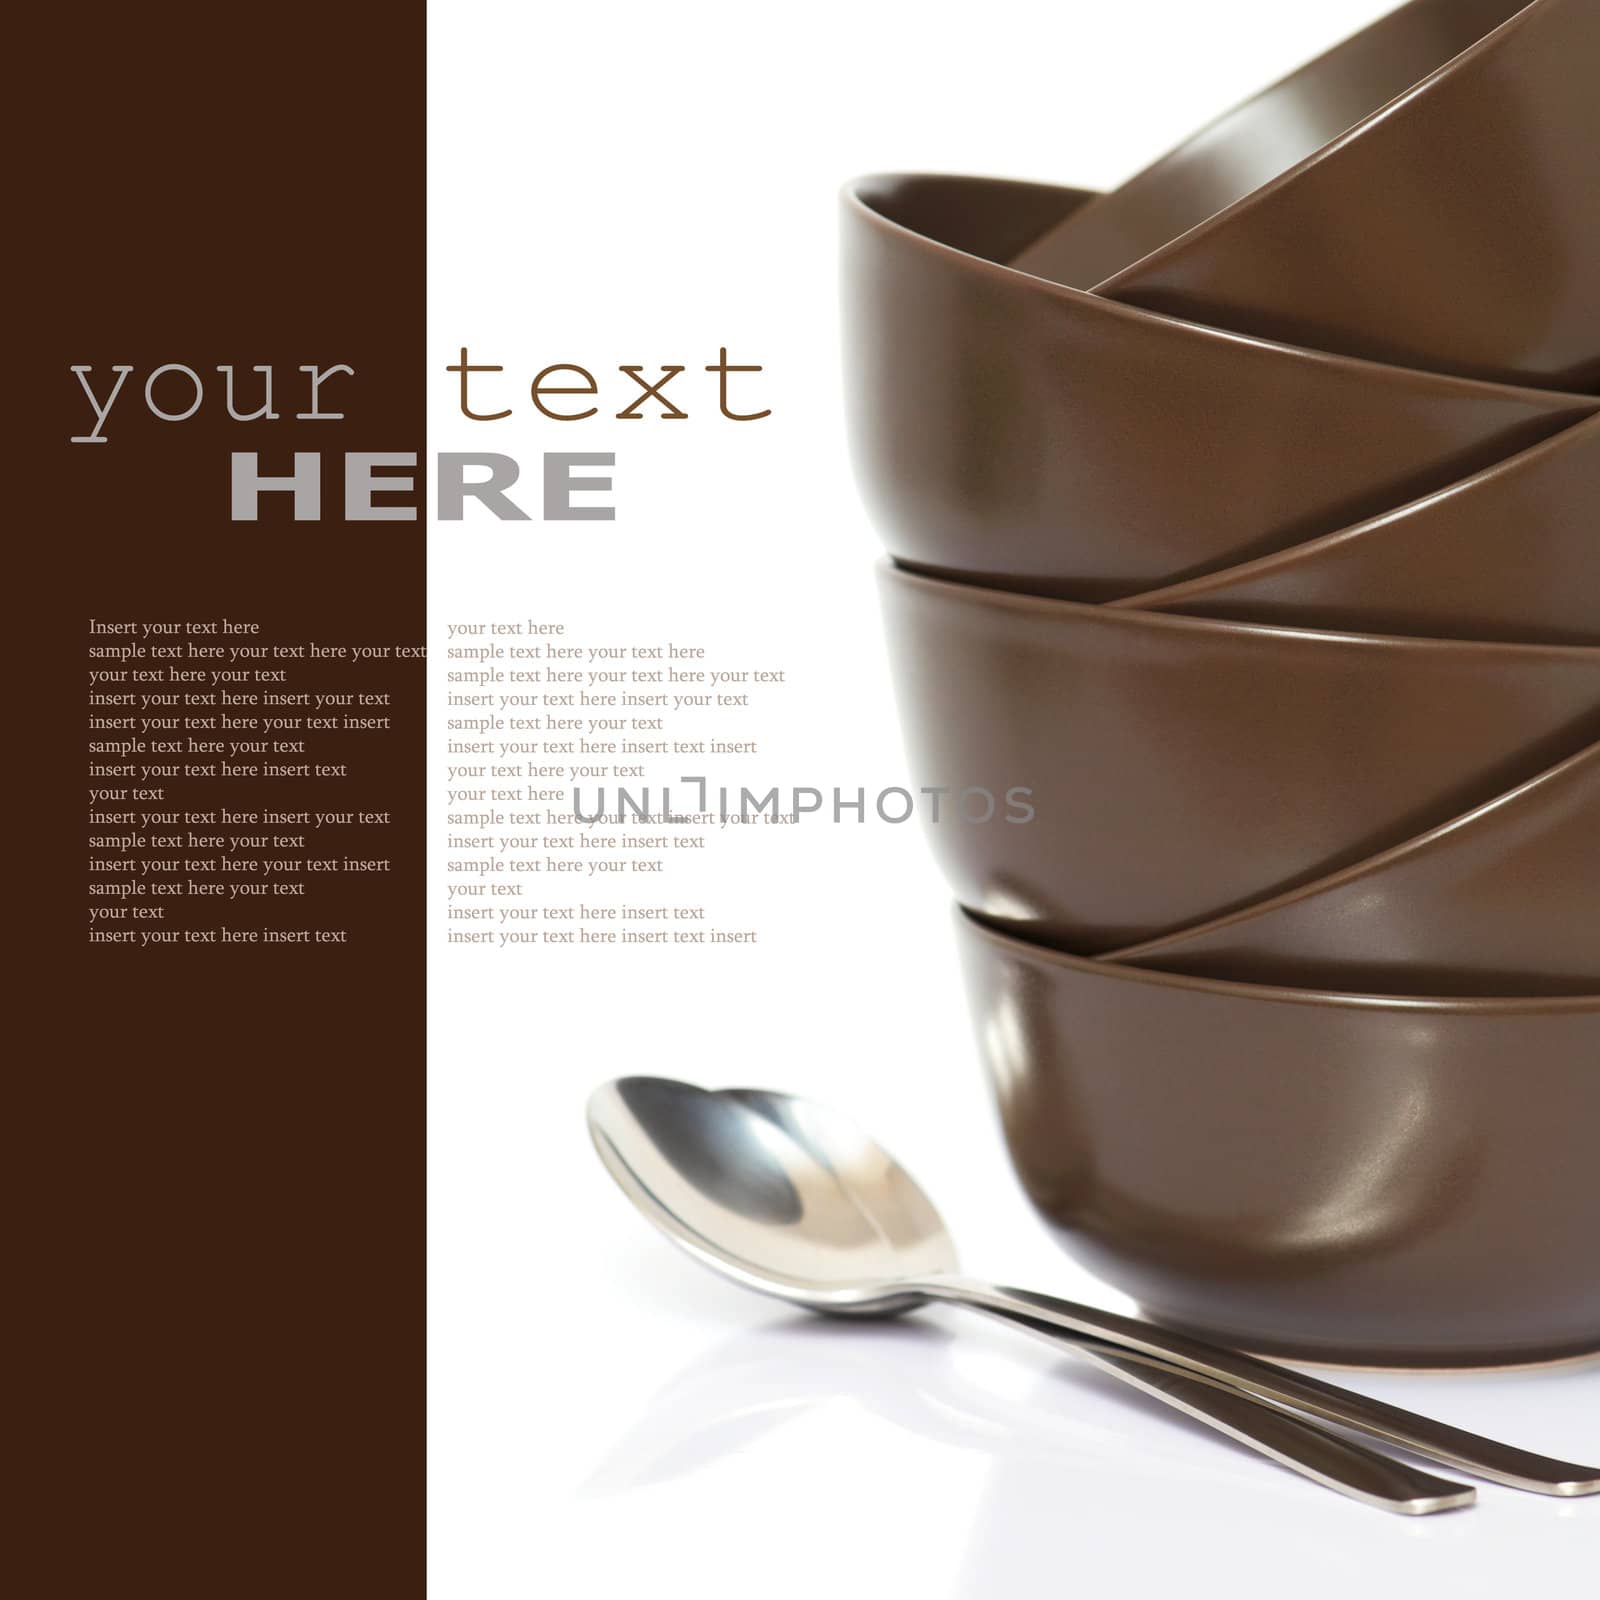 Stack of bowls and spoons(with sample text)